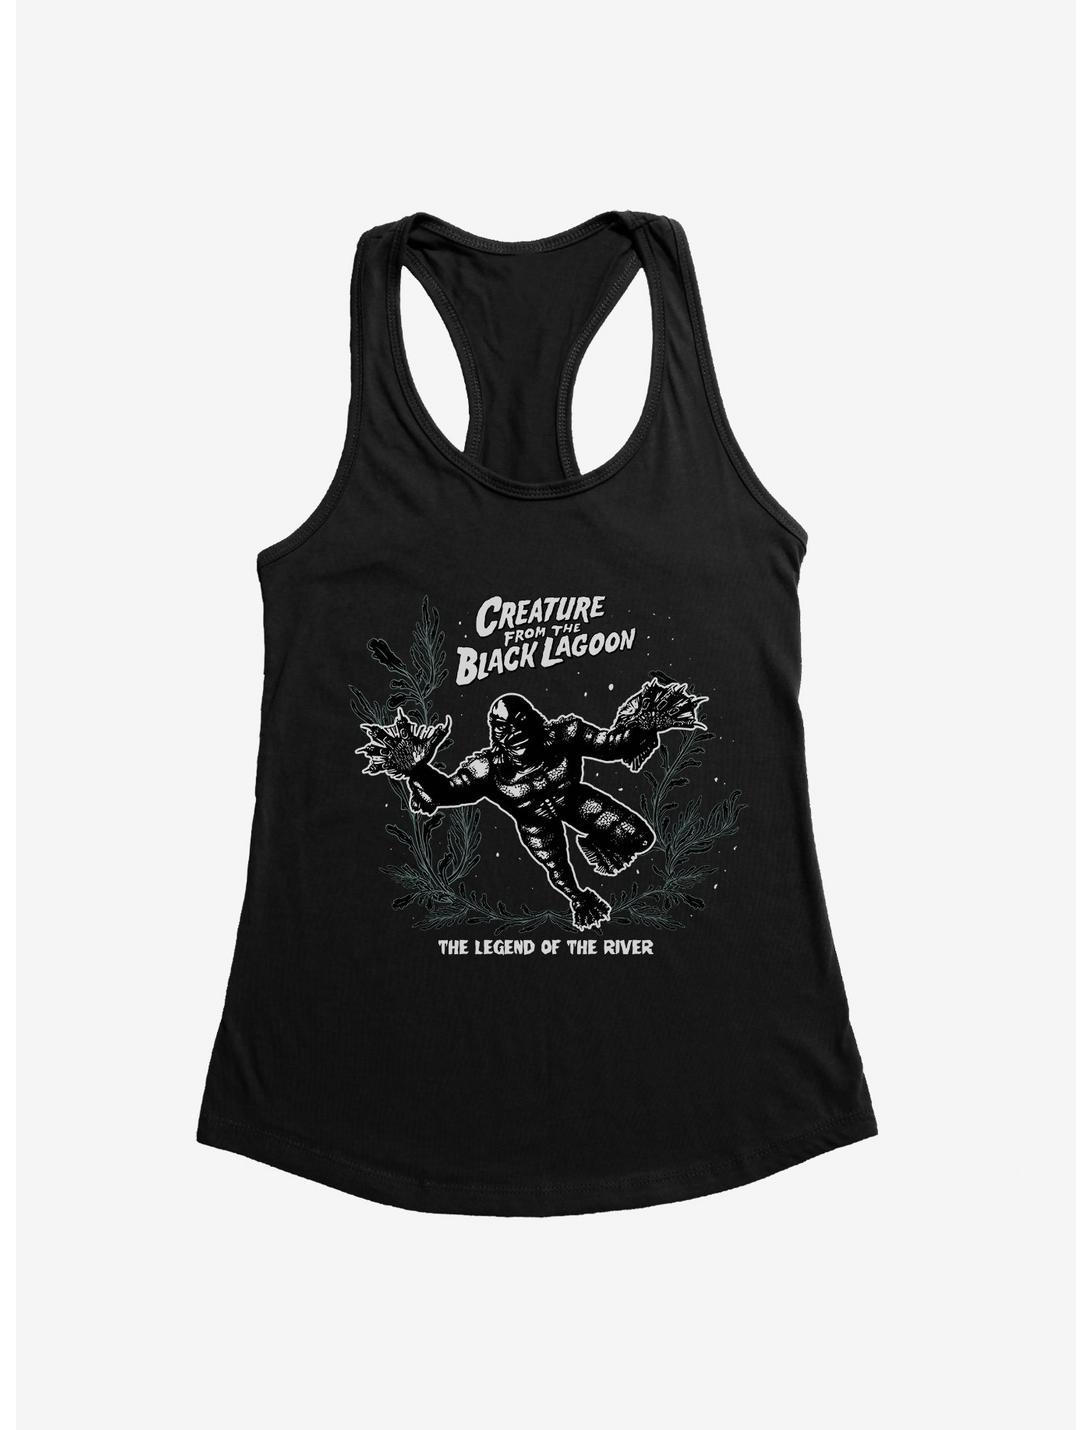 Creature From The Black Lagoon Legend Of The River Girls Tank, BLACK, hi-res